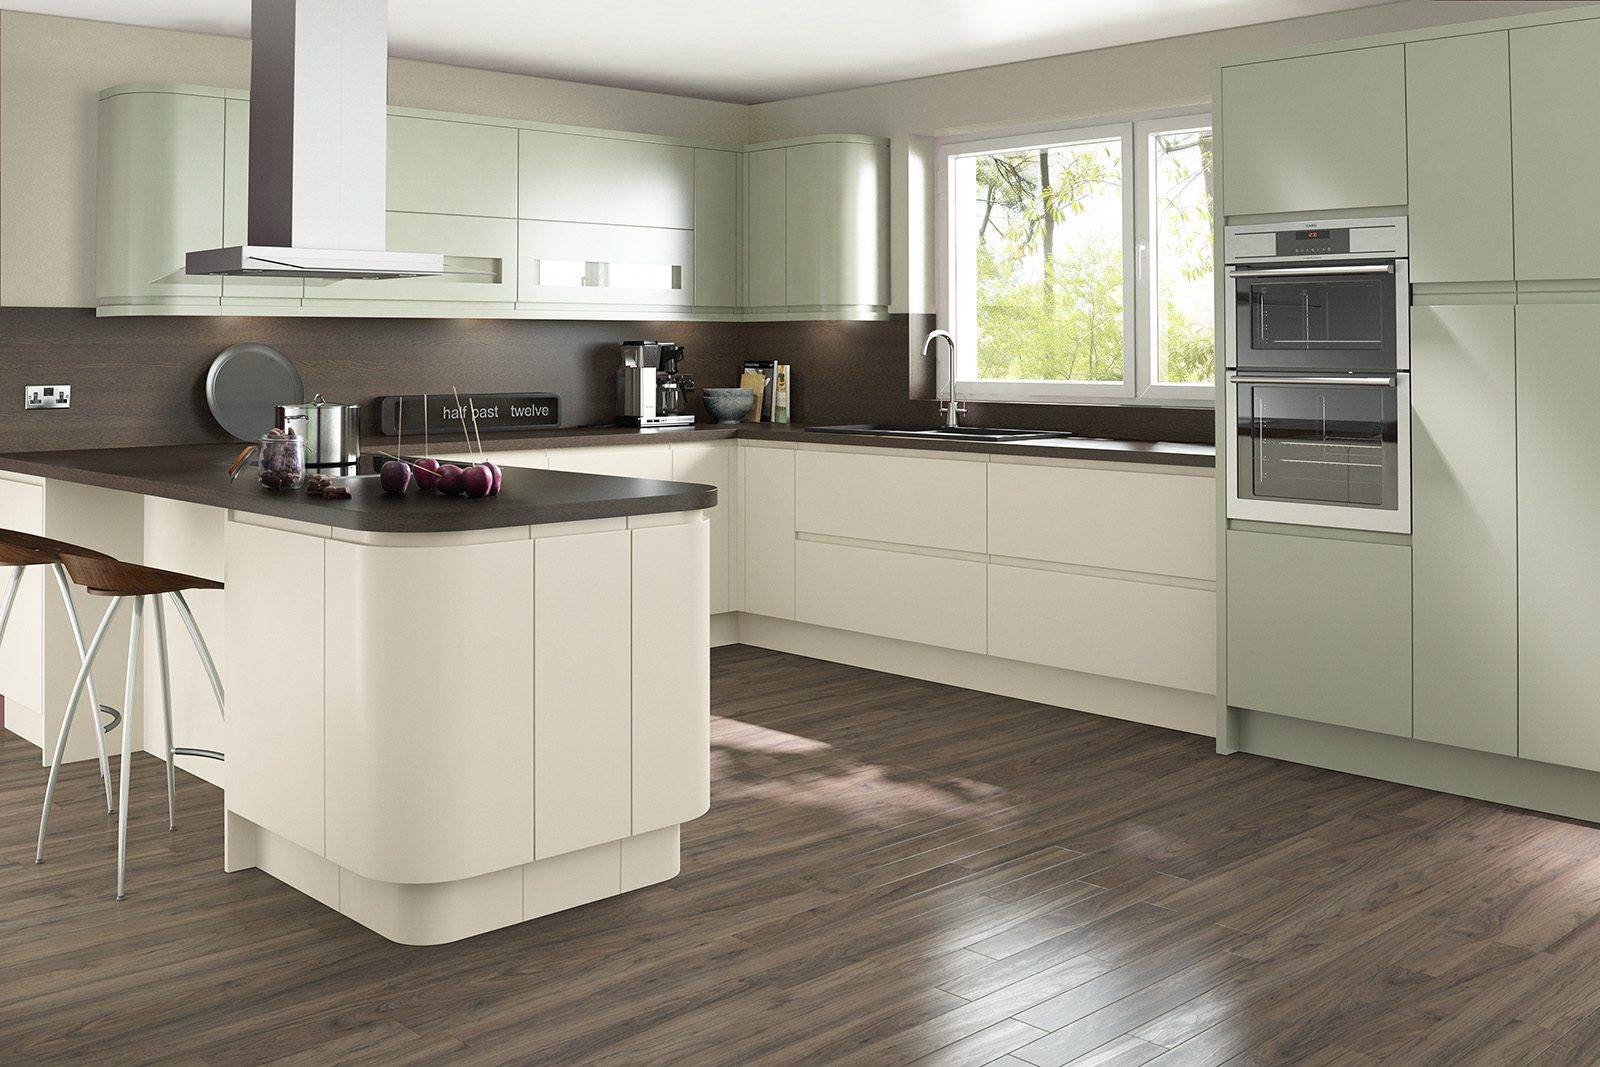 In Line Painted Ivory And Green | Net Kitchens, Walthamstow